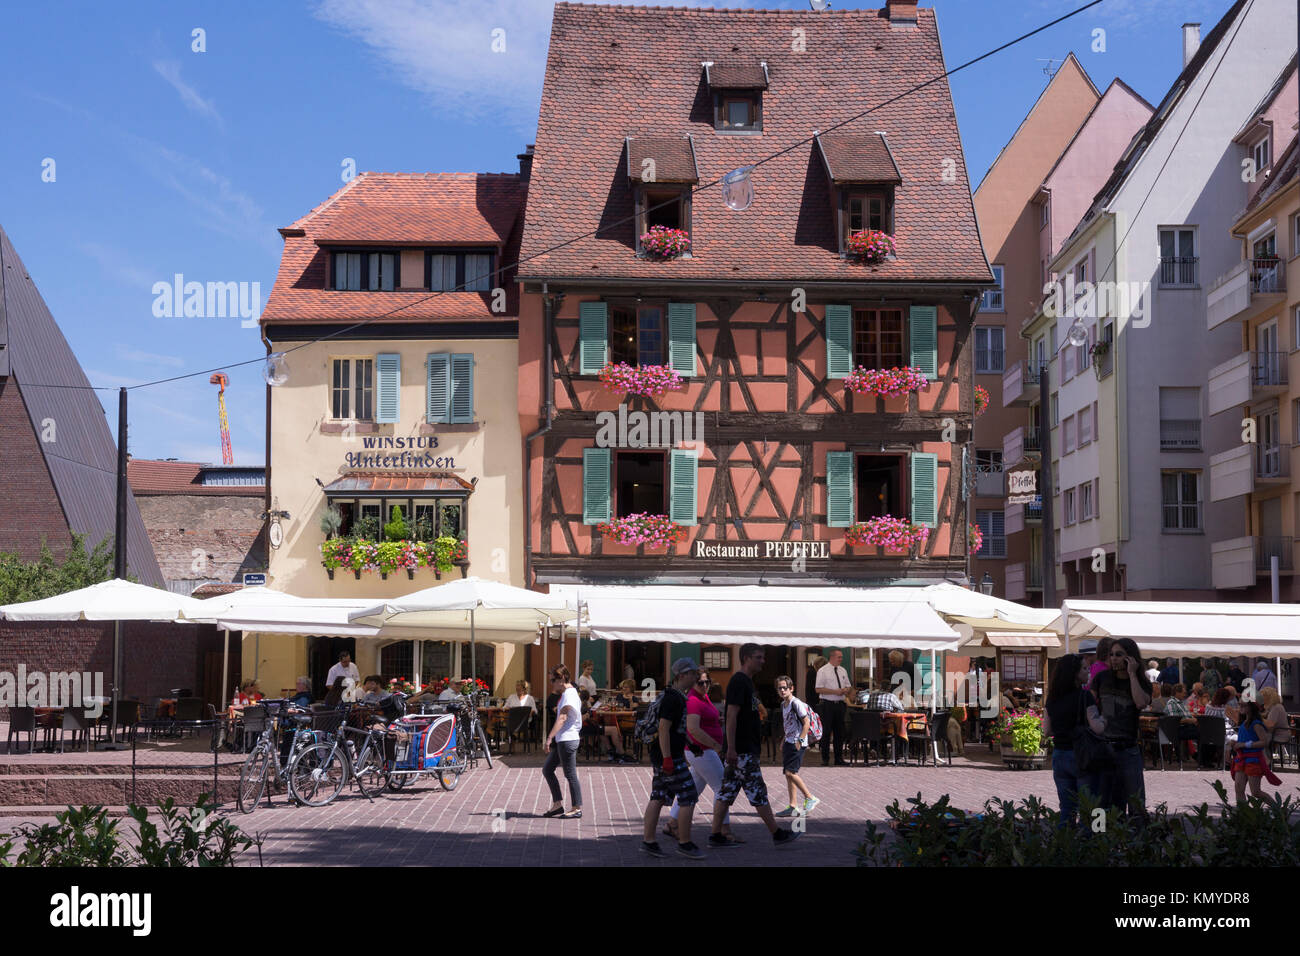 The Restaurant Pfeffel and Winstub Unterlinden, popular with tourists on a summer's day in Colmar, Alsace Stock Photo